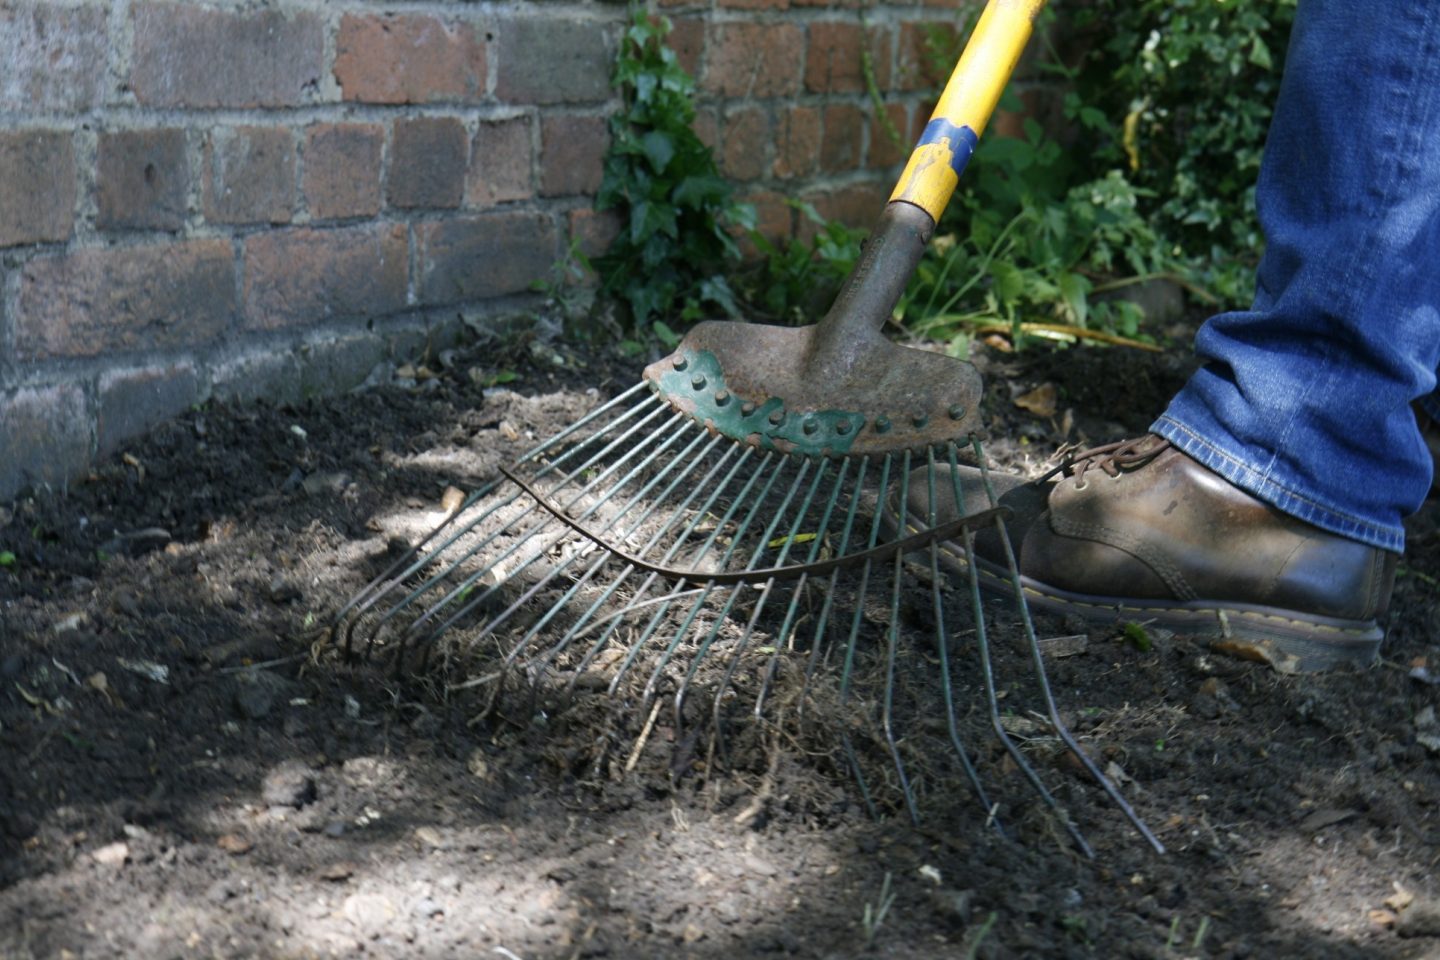 A spring tine rake is used to give the soil a final rake